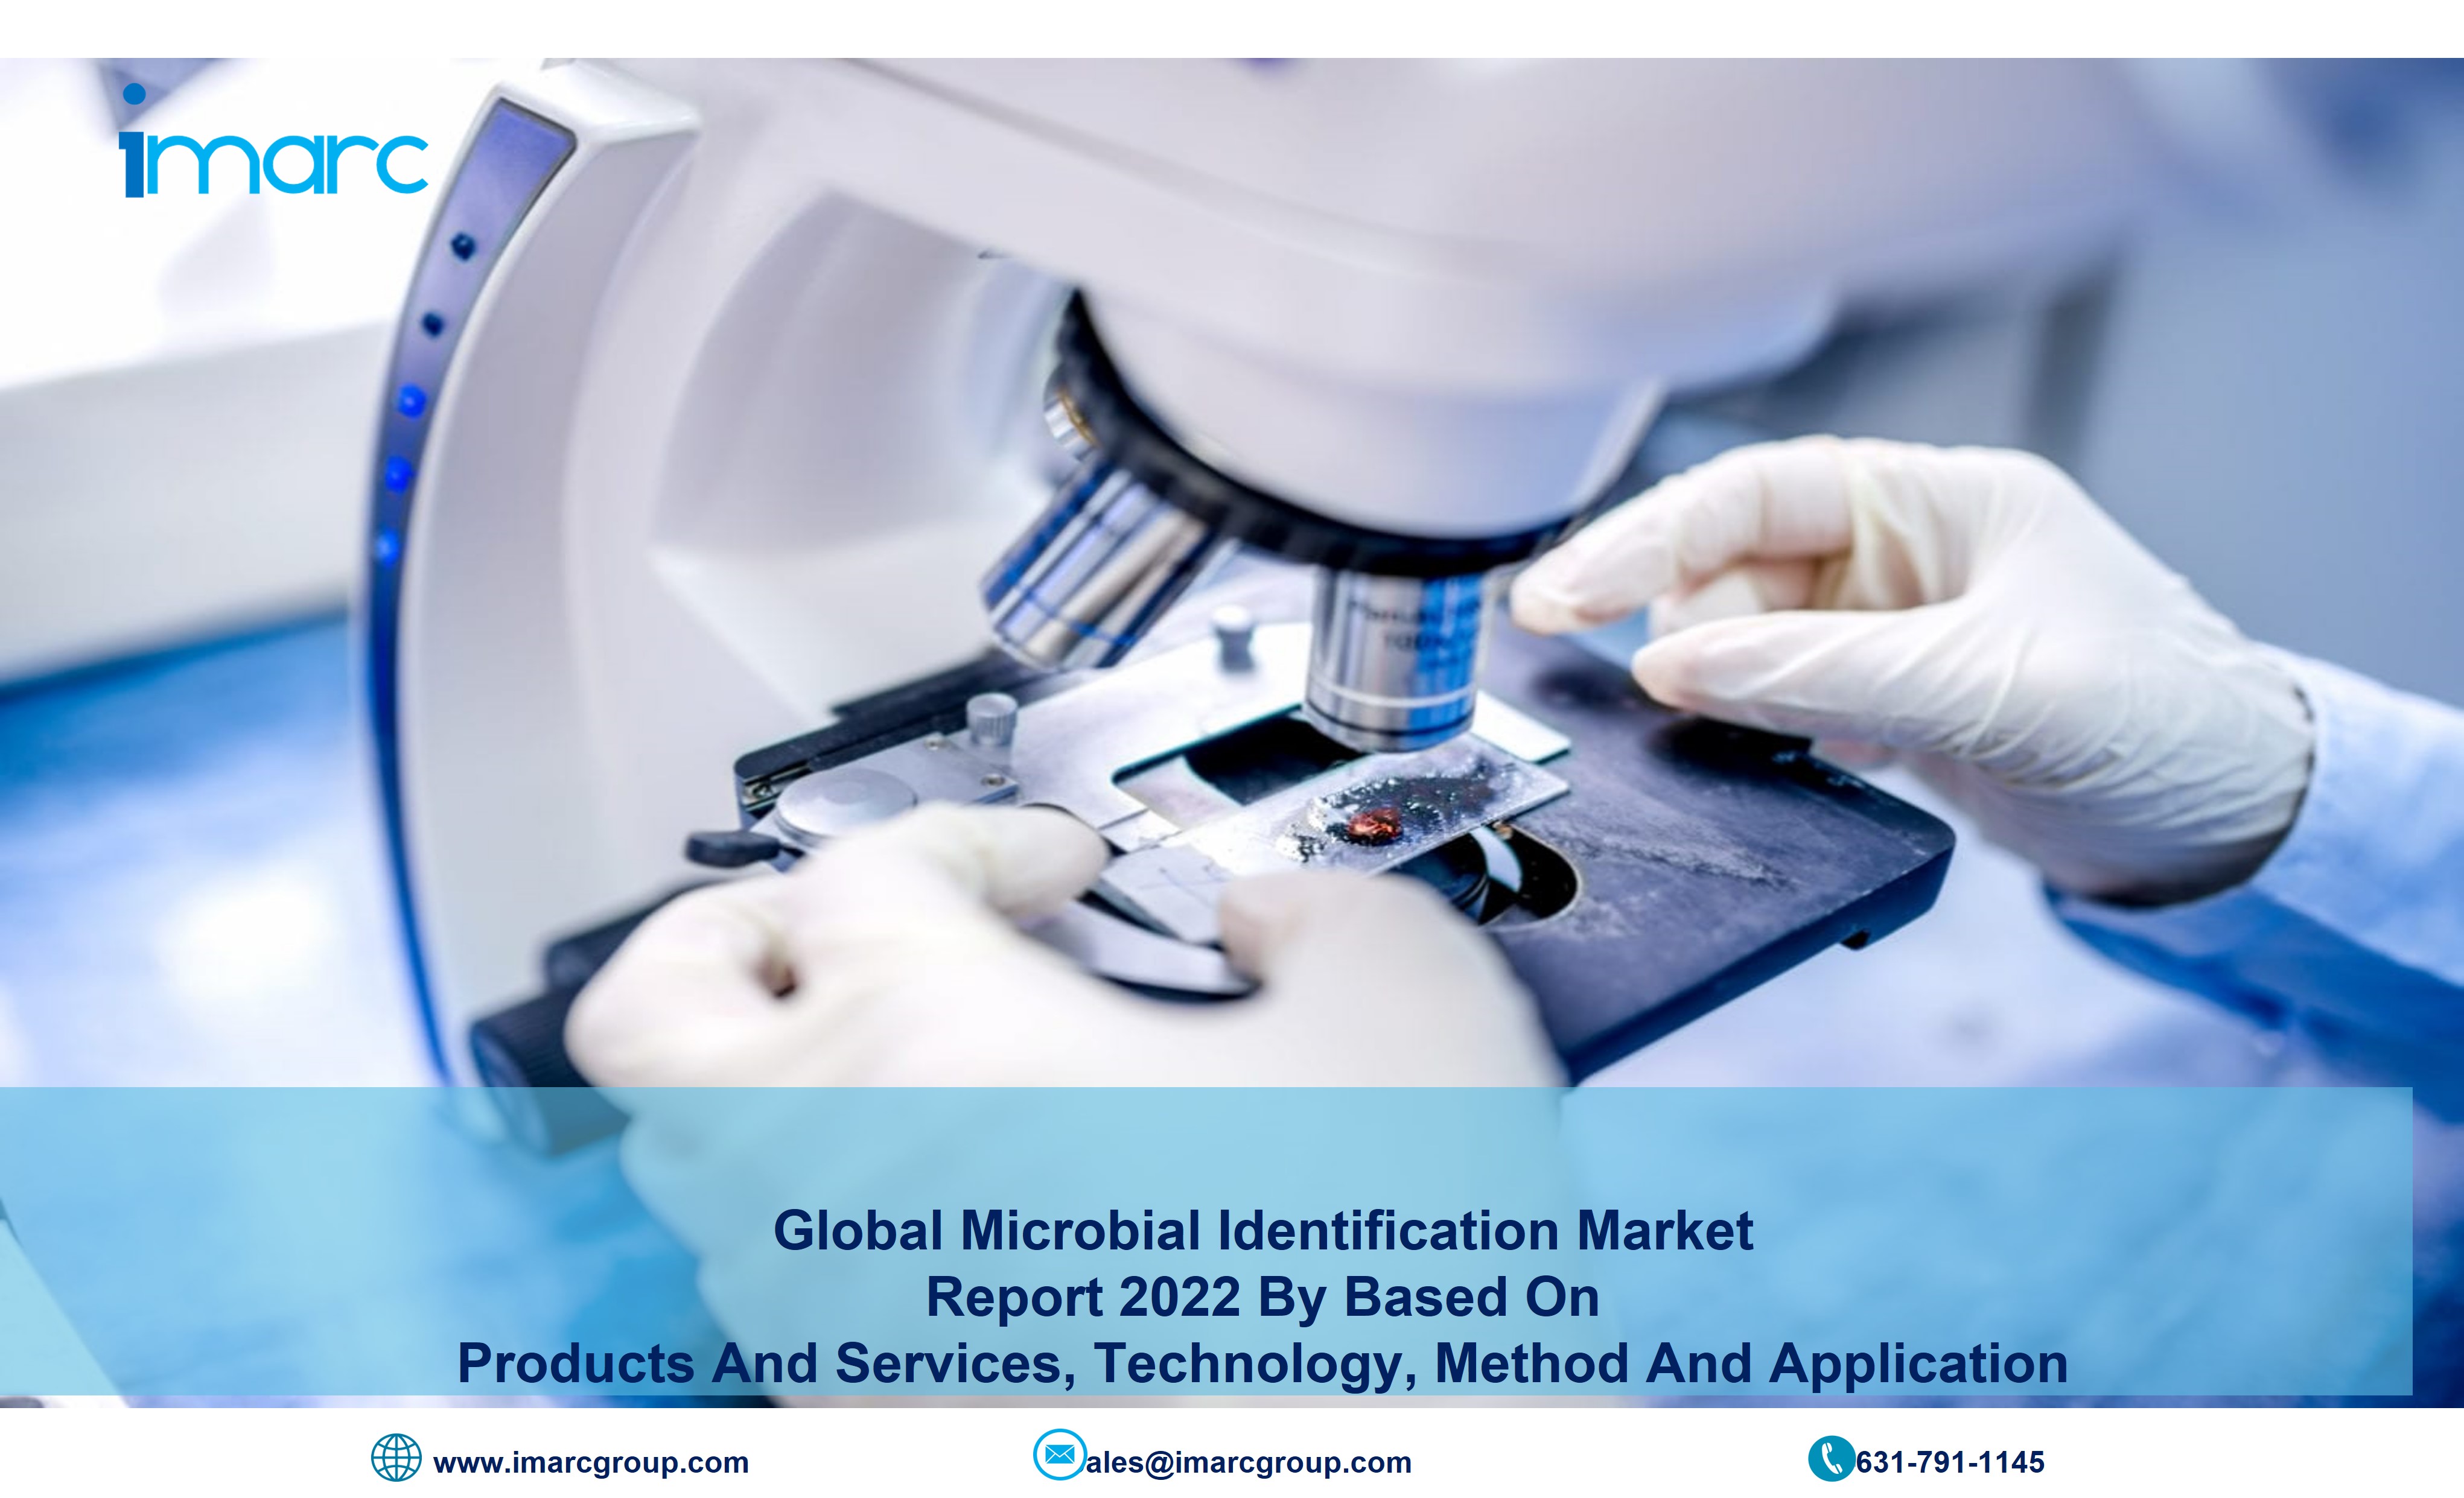 Microbial Identification Market to Reach US$ 7.32 Billion by 2027 | IMARC Group